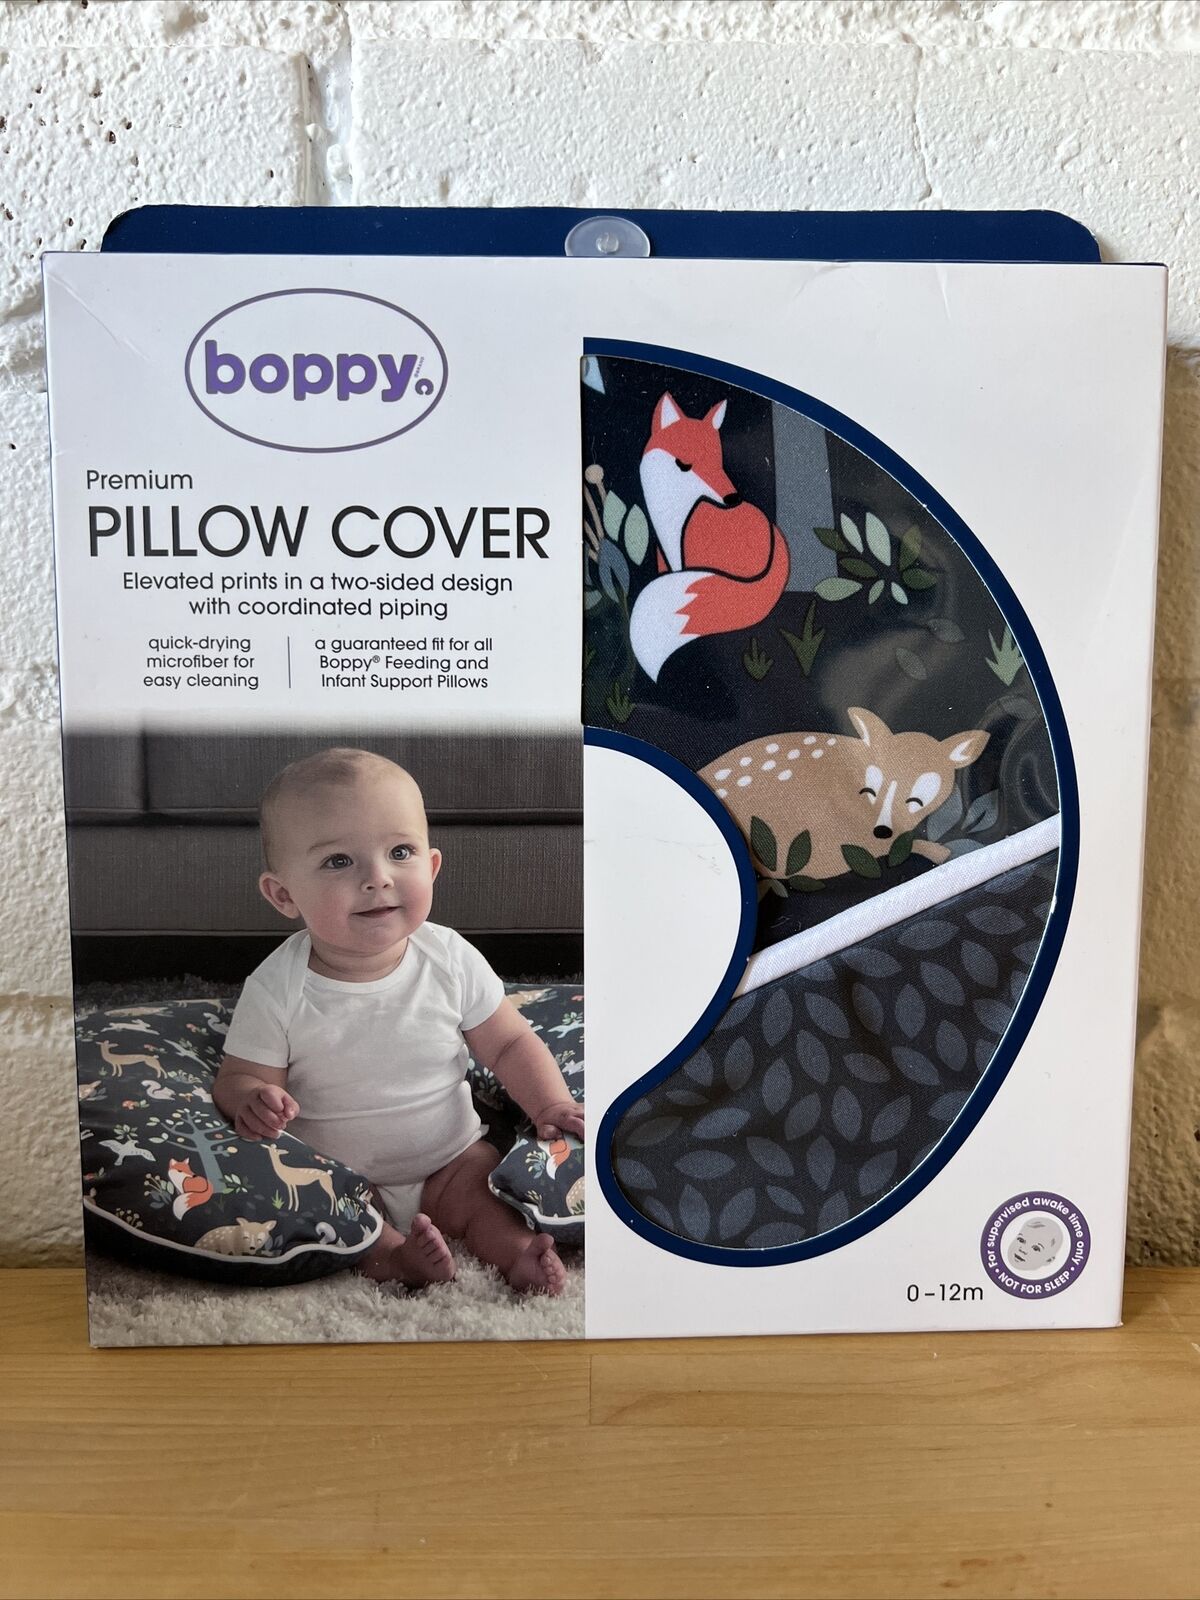 Boppy Premium Pillow Cover - Blue Forest Friends (pillow Not Included) Nib